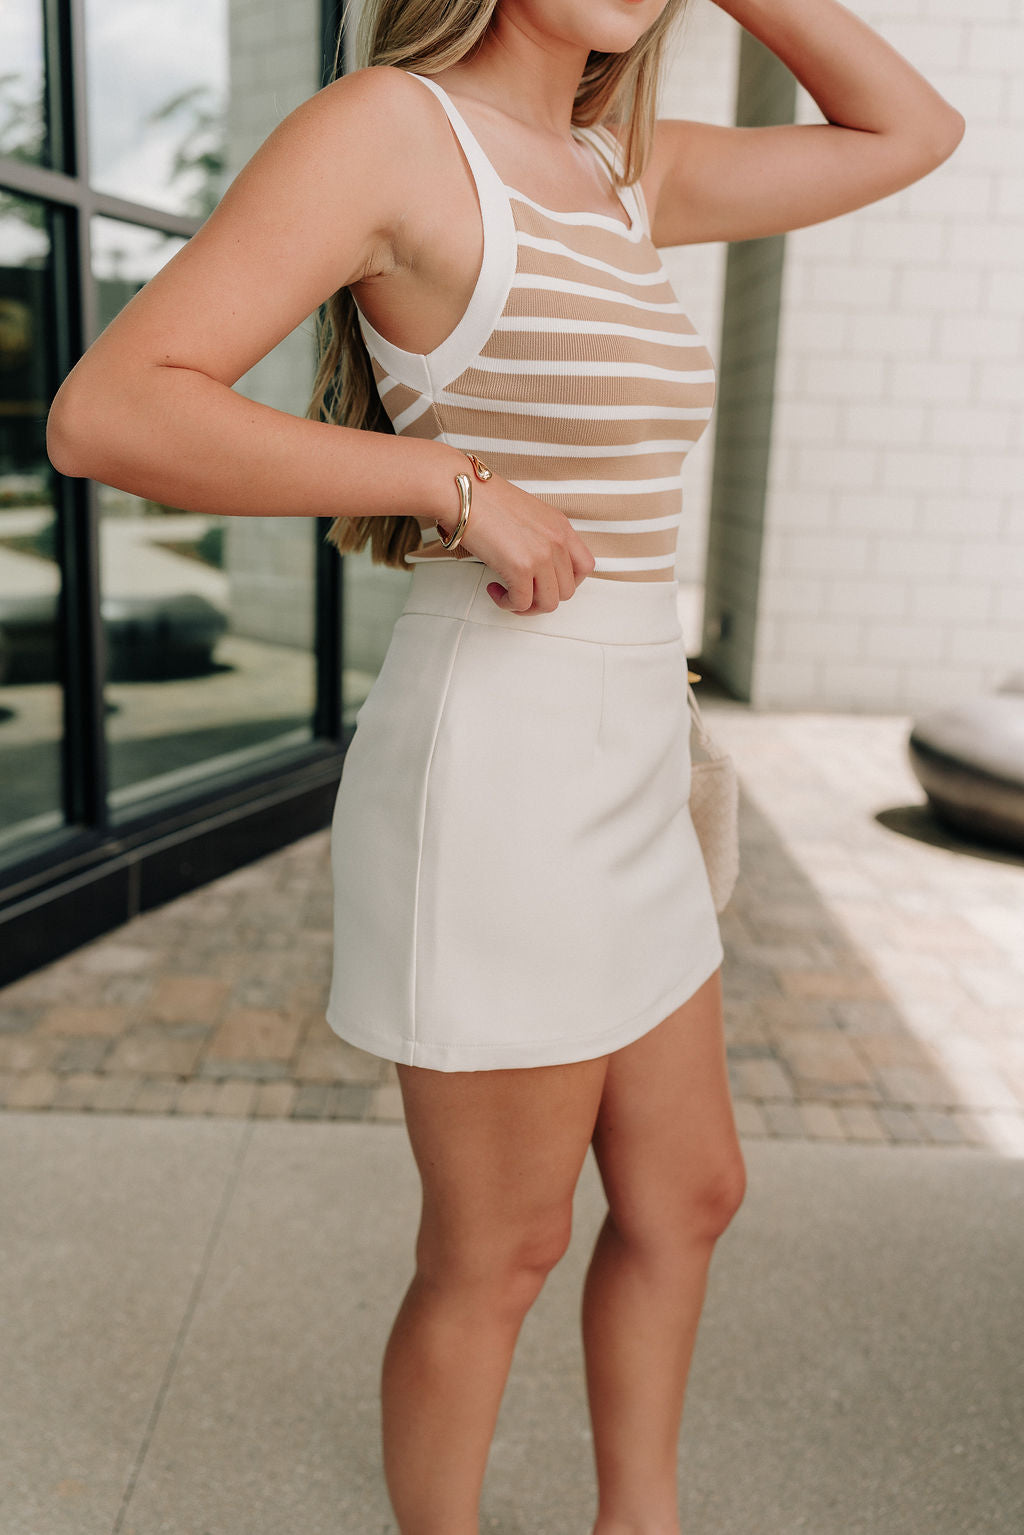 side view of female model wearing the Isabella Cream Mini Skort which features Cream Lightweight Fabric, Mini Length, Cream Shorts Lining and Monochrome Size Zipper with Hook Closure